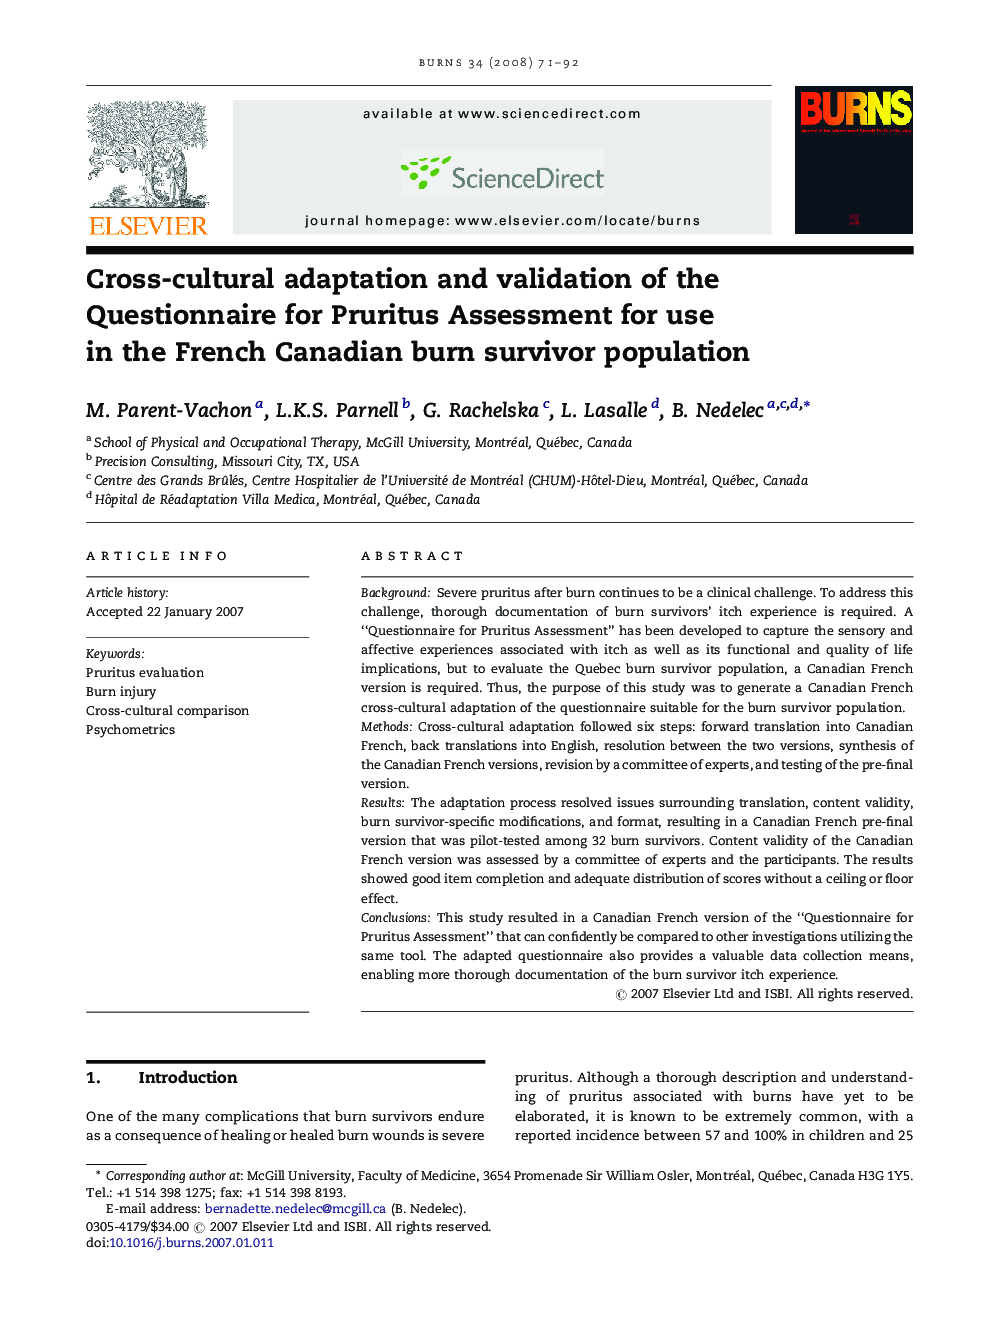 Cross-cultural adaptation and validation of the Questionnaire for Pruritus Assessment for use in the French Canadian burn survivor population